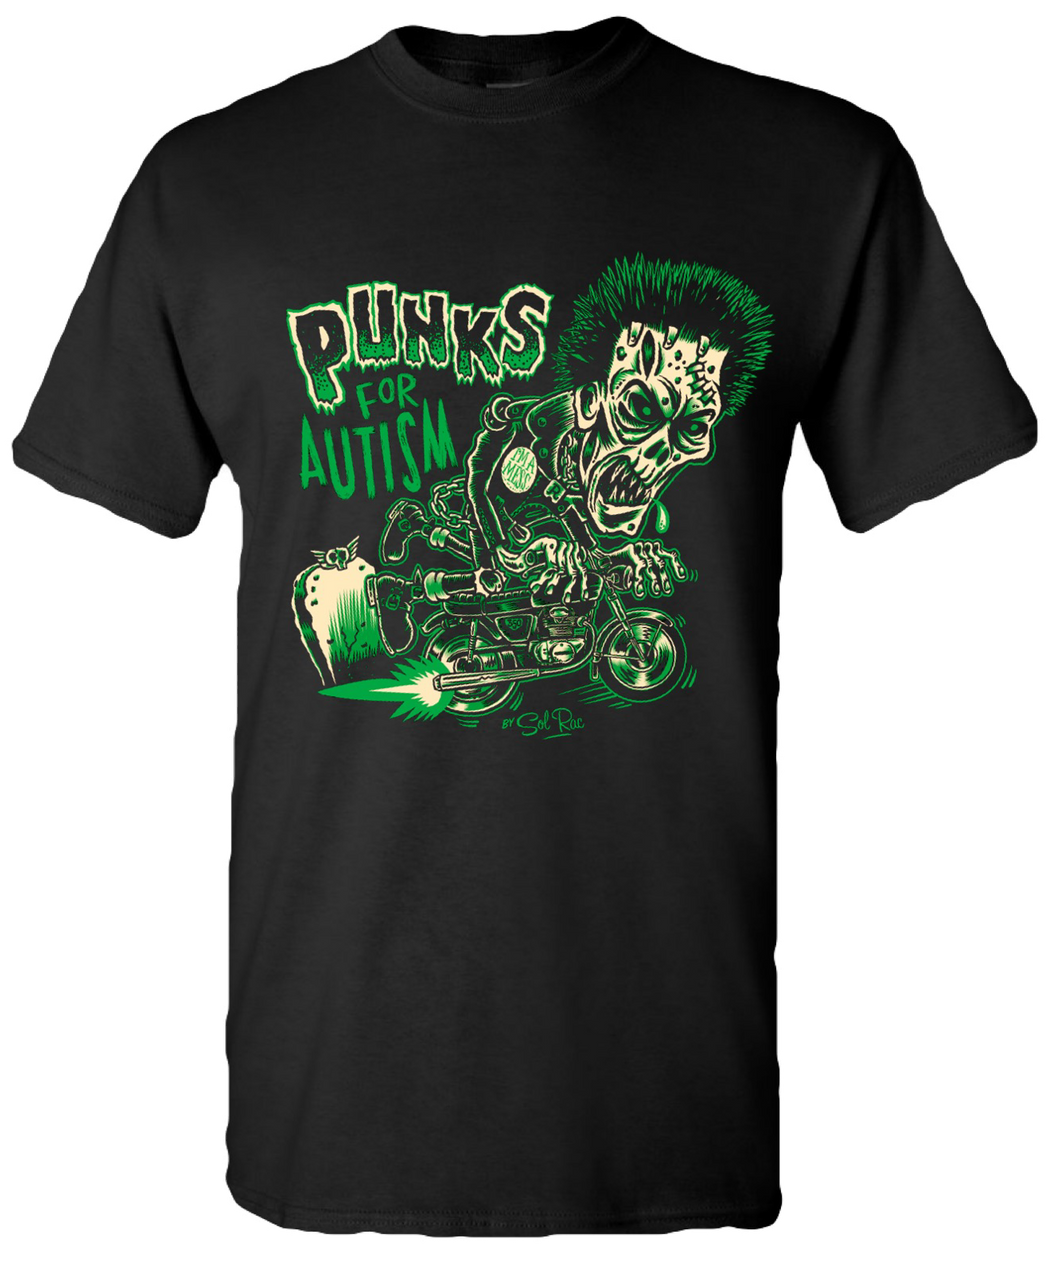 Punks for Autism - Psychobilly Sid - Short Sleeve